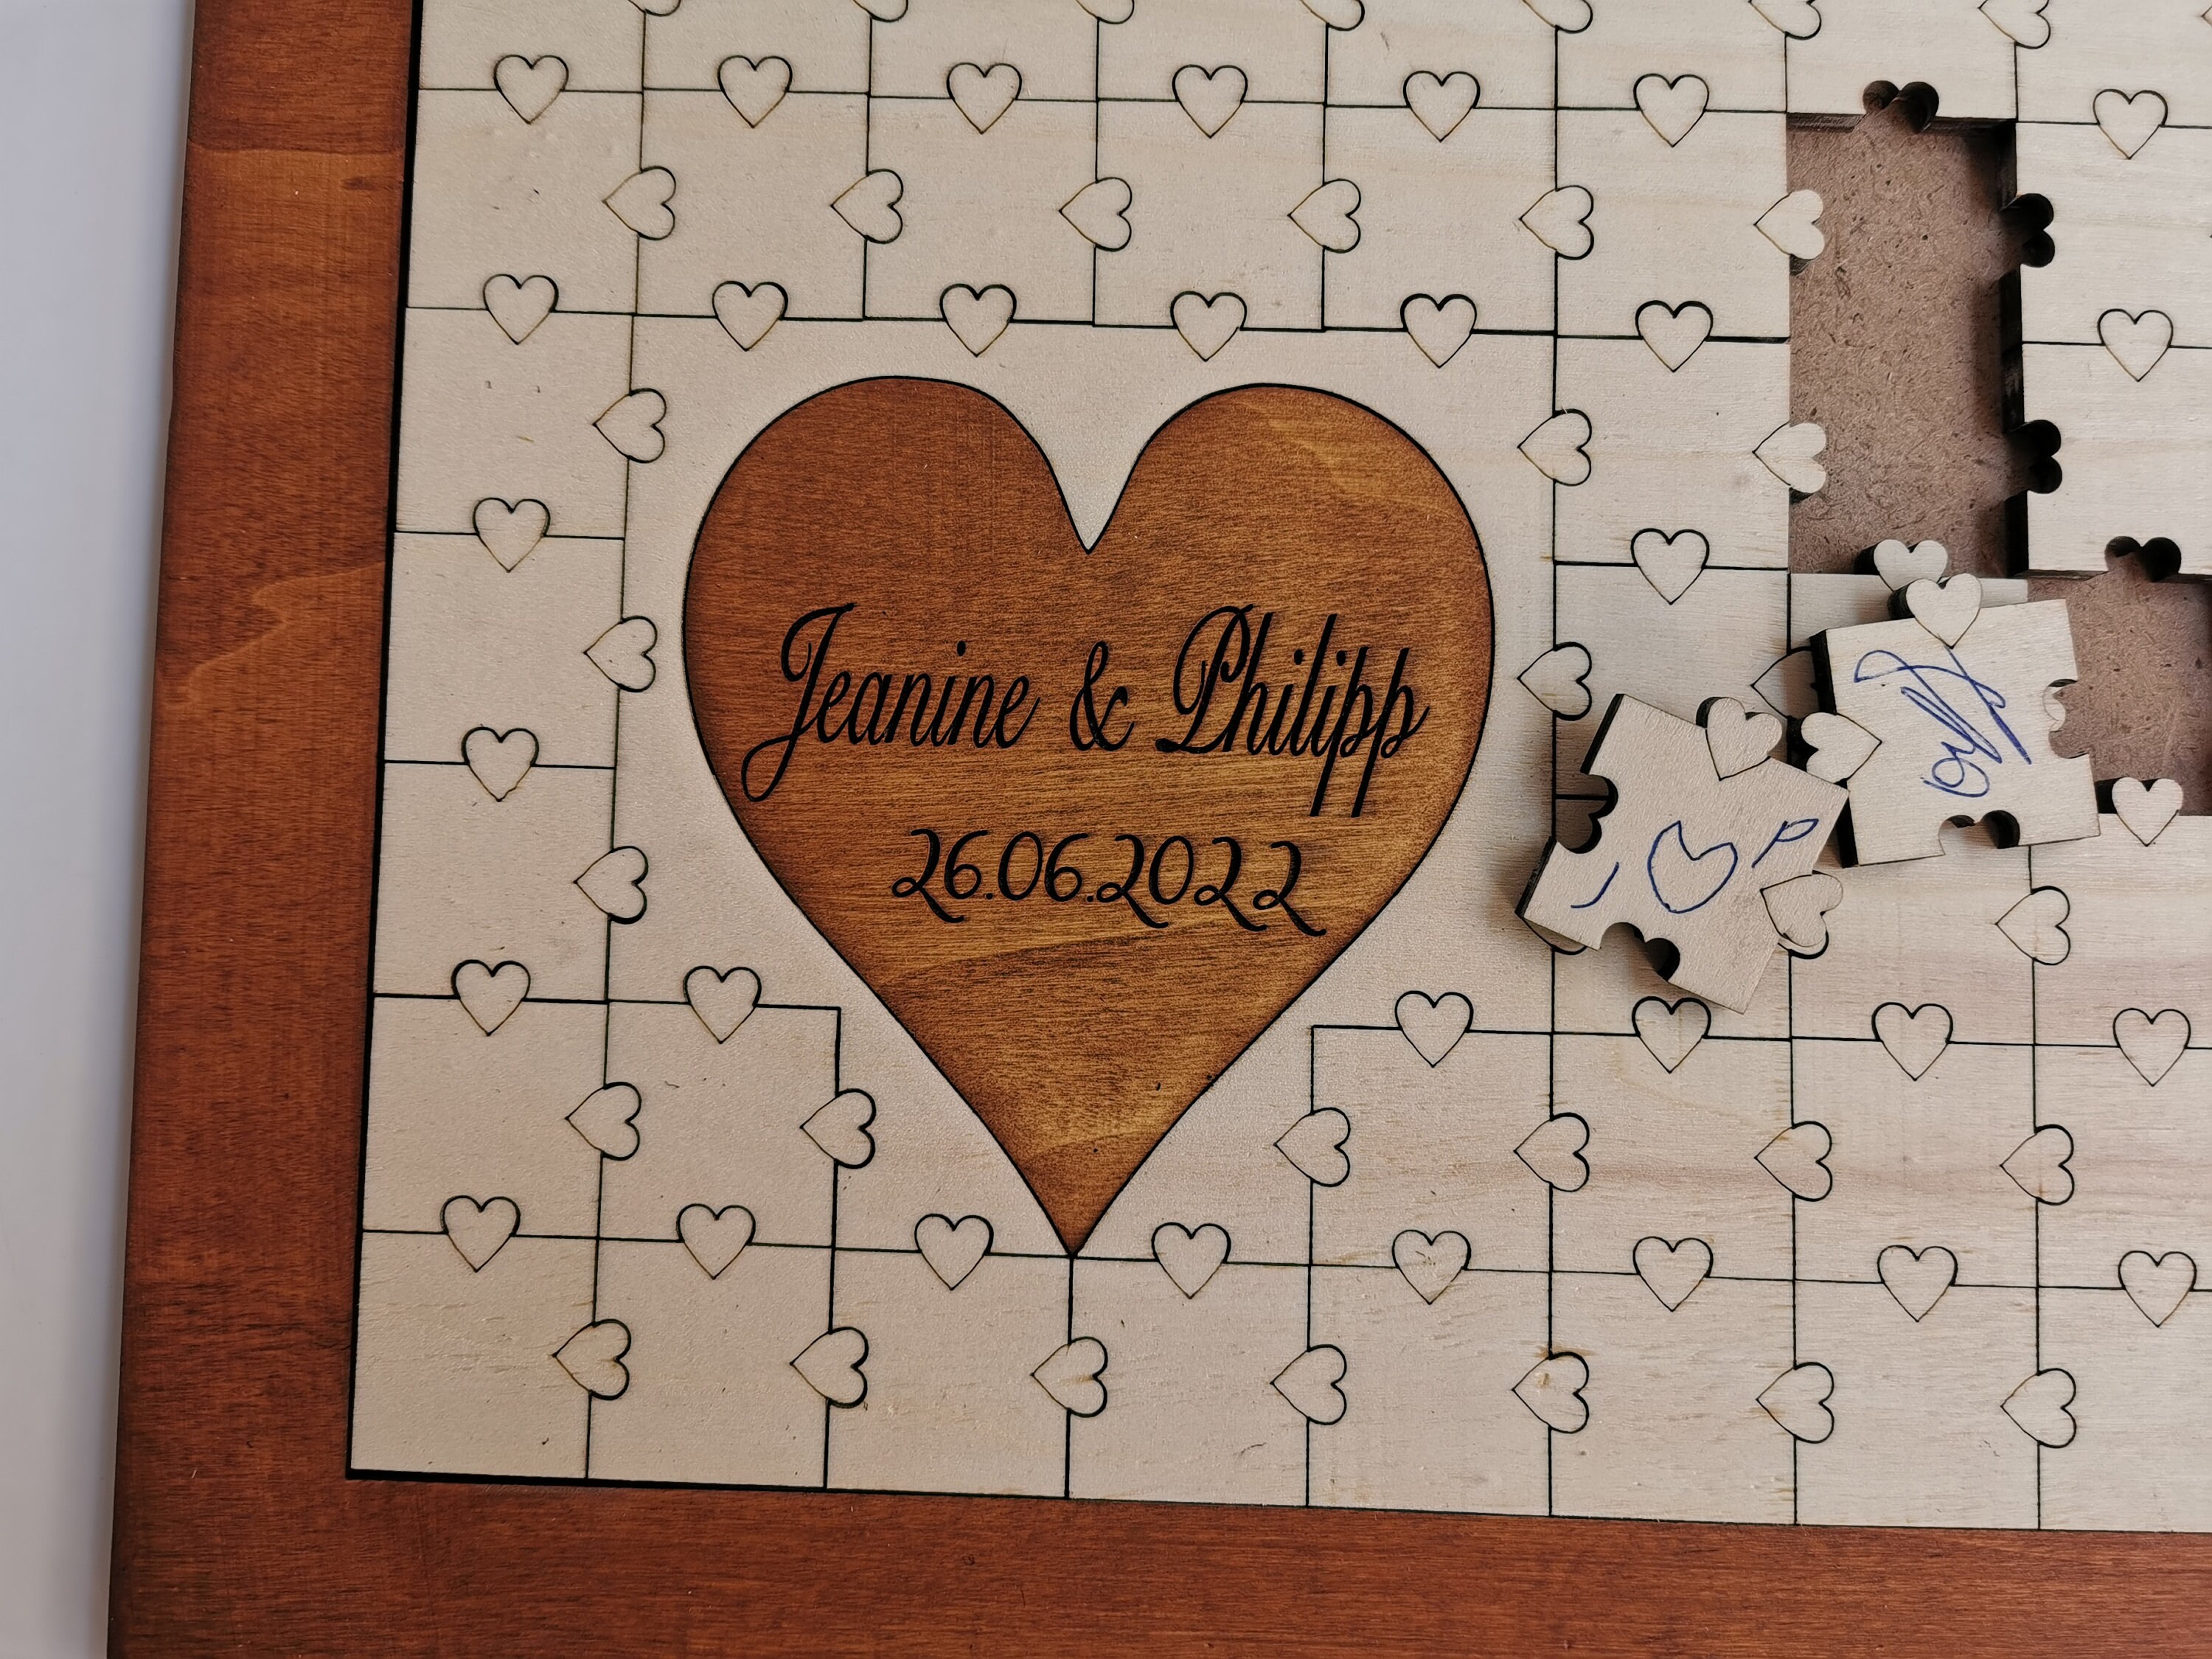 Wood Guest Book Puzzle, Wedding Sign Puzzle, Wood Guest Books Alternative, Wedding Guestbook Alternative Wood